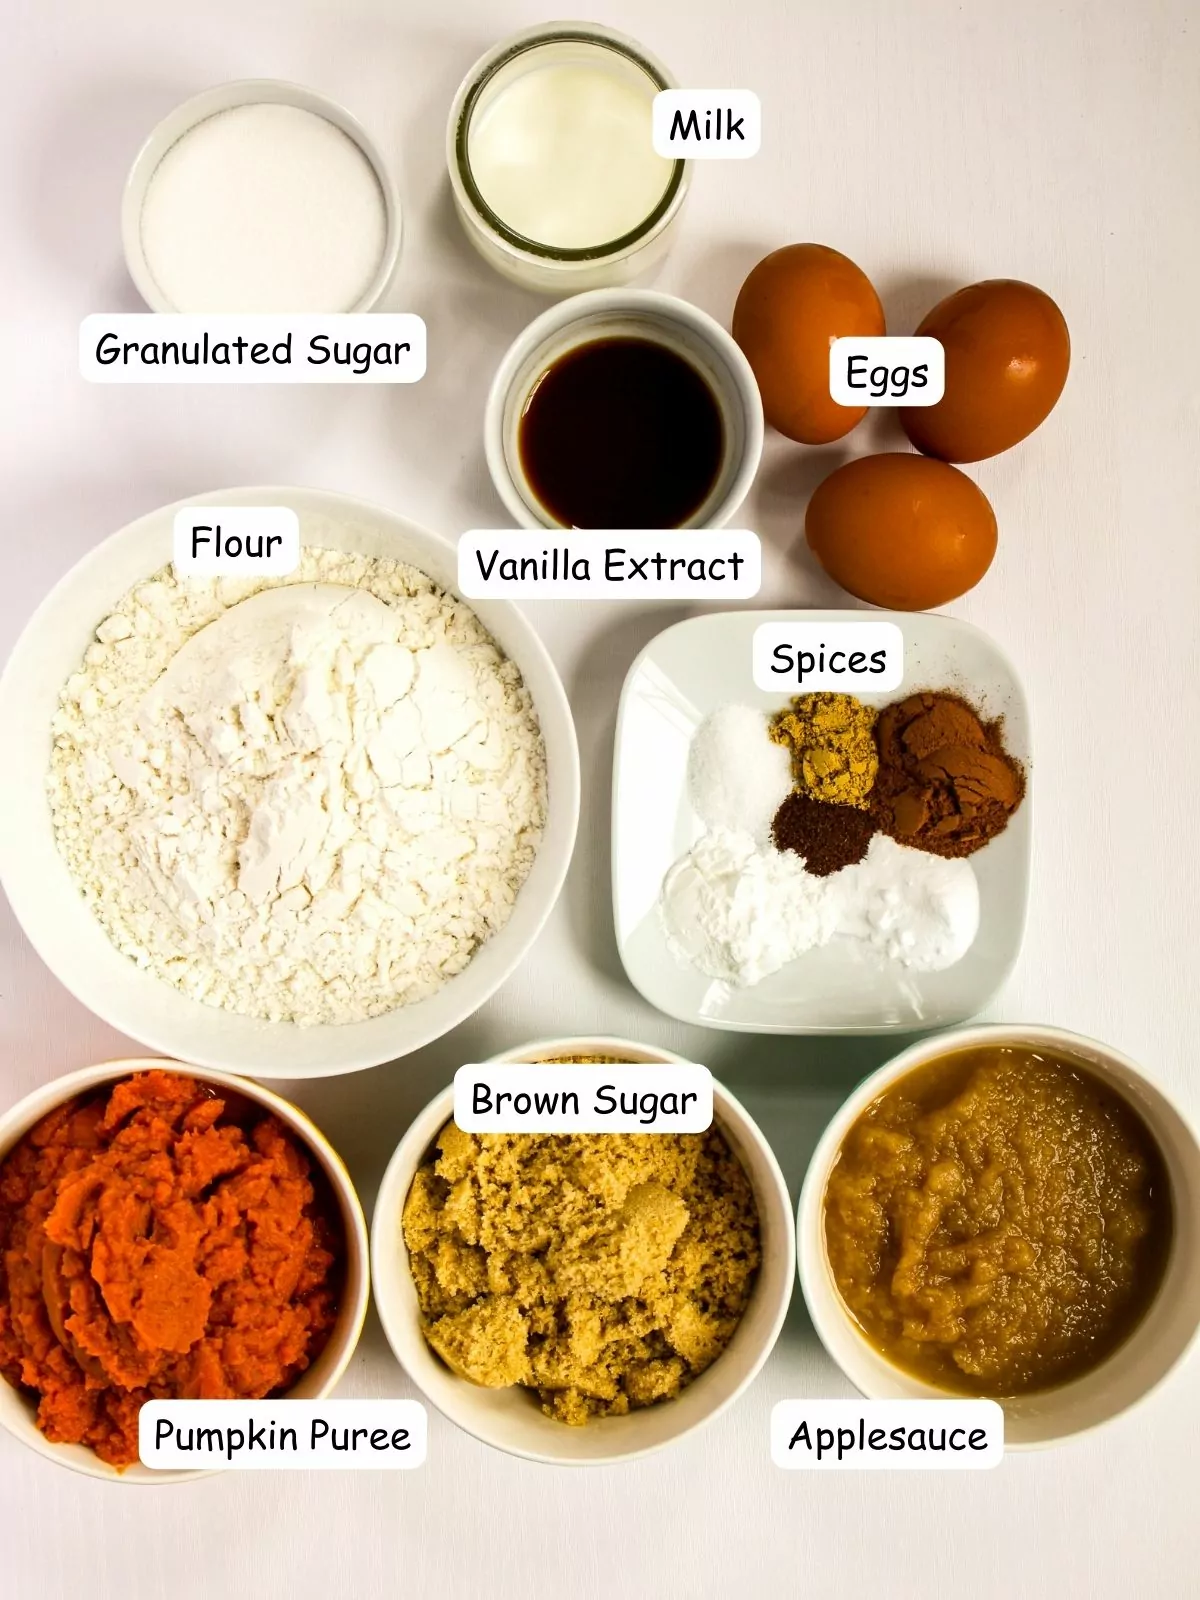 Ingredients for spice cake.